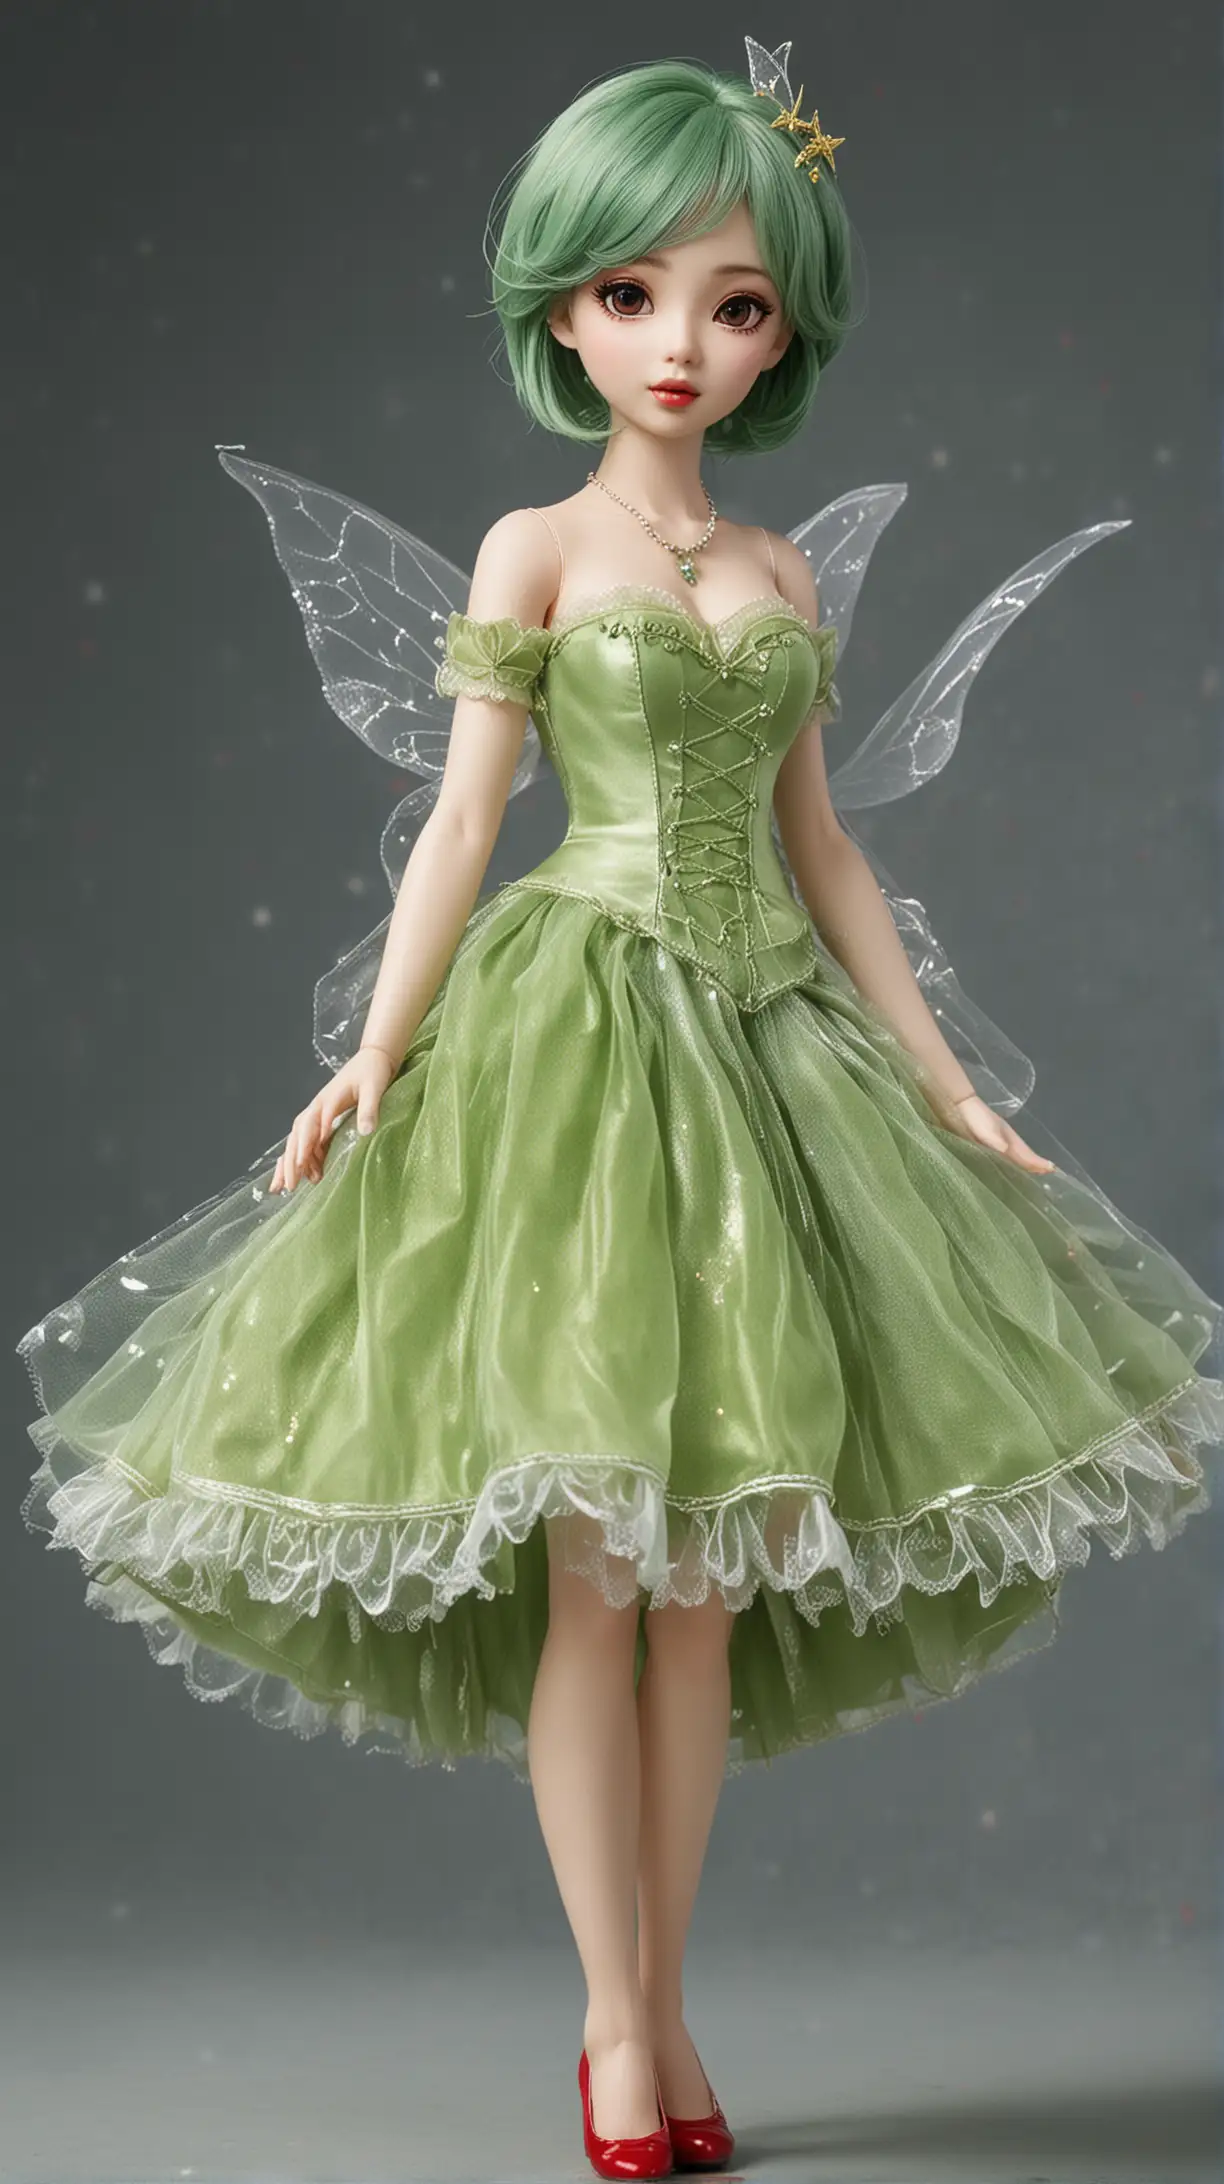 Kim Hyeyoon Beautiful Doll with Green Hair and Tinkerbell Costume